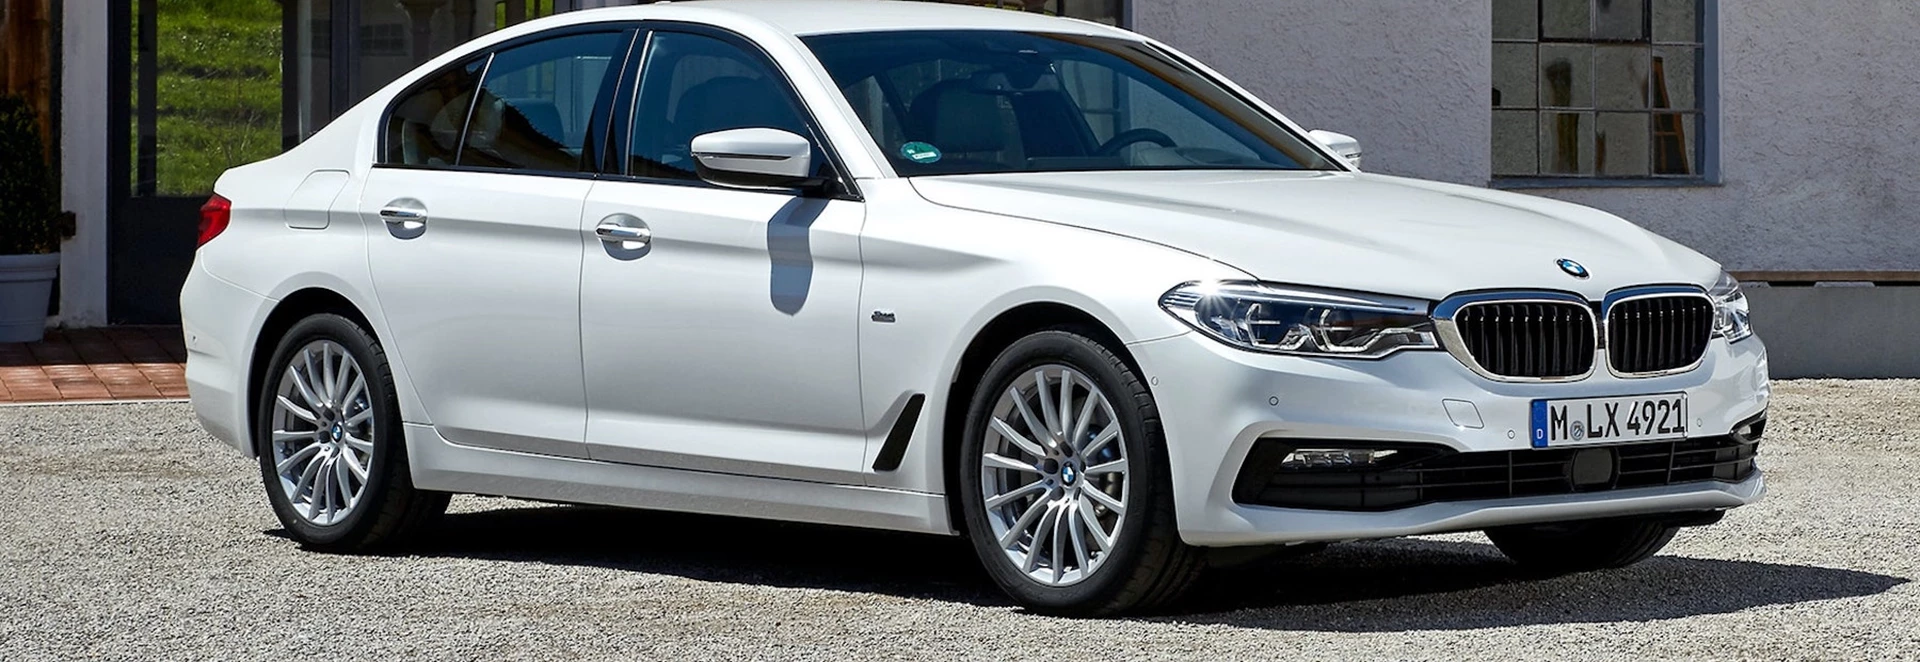 BMW 545e plug-in hybrid: 5 things you need to know 